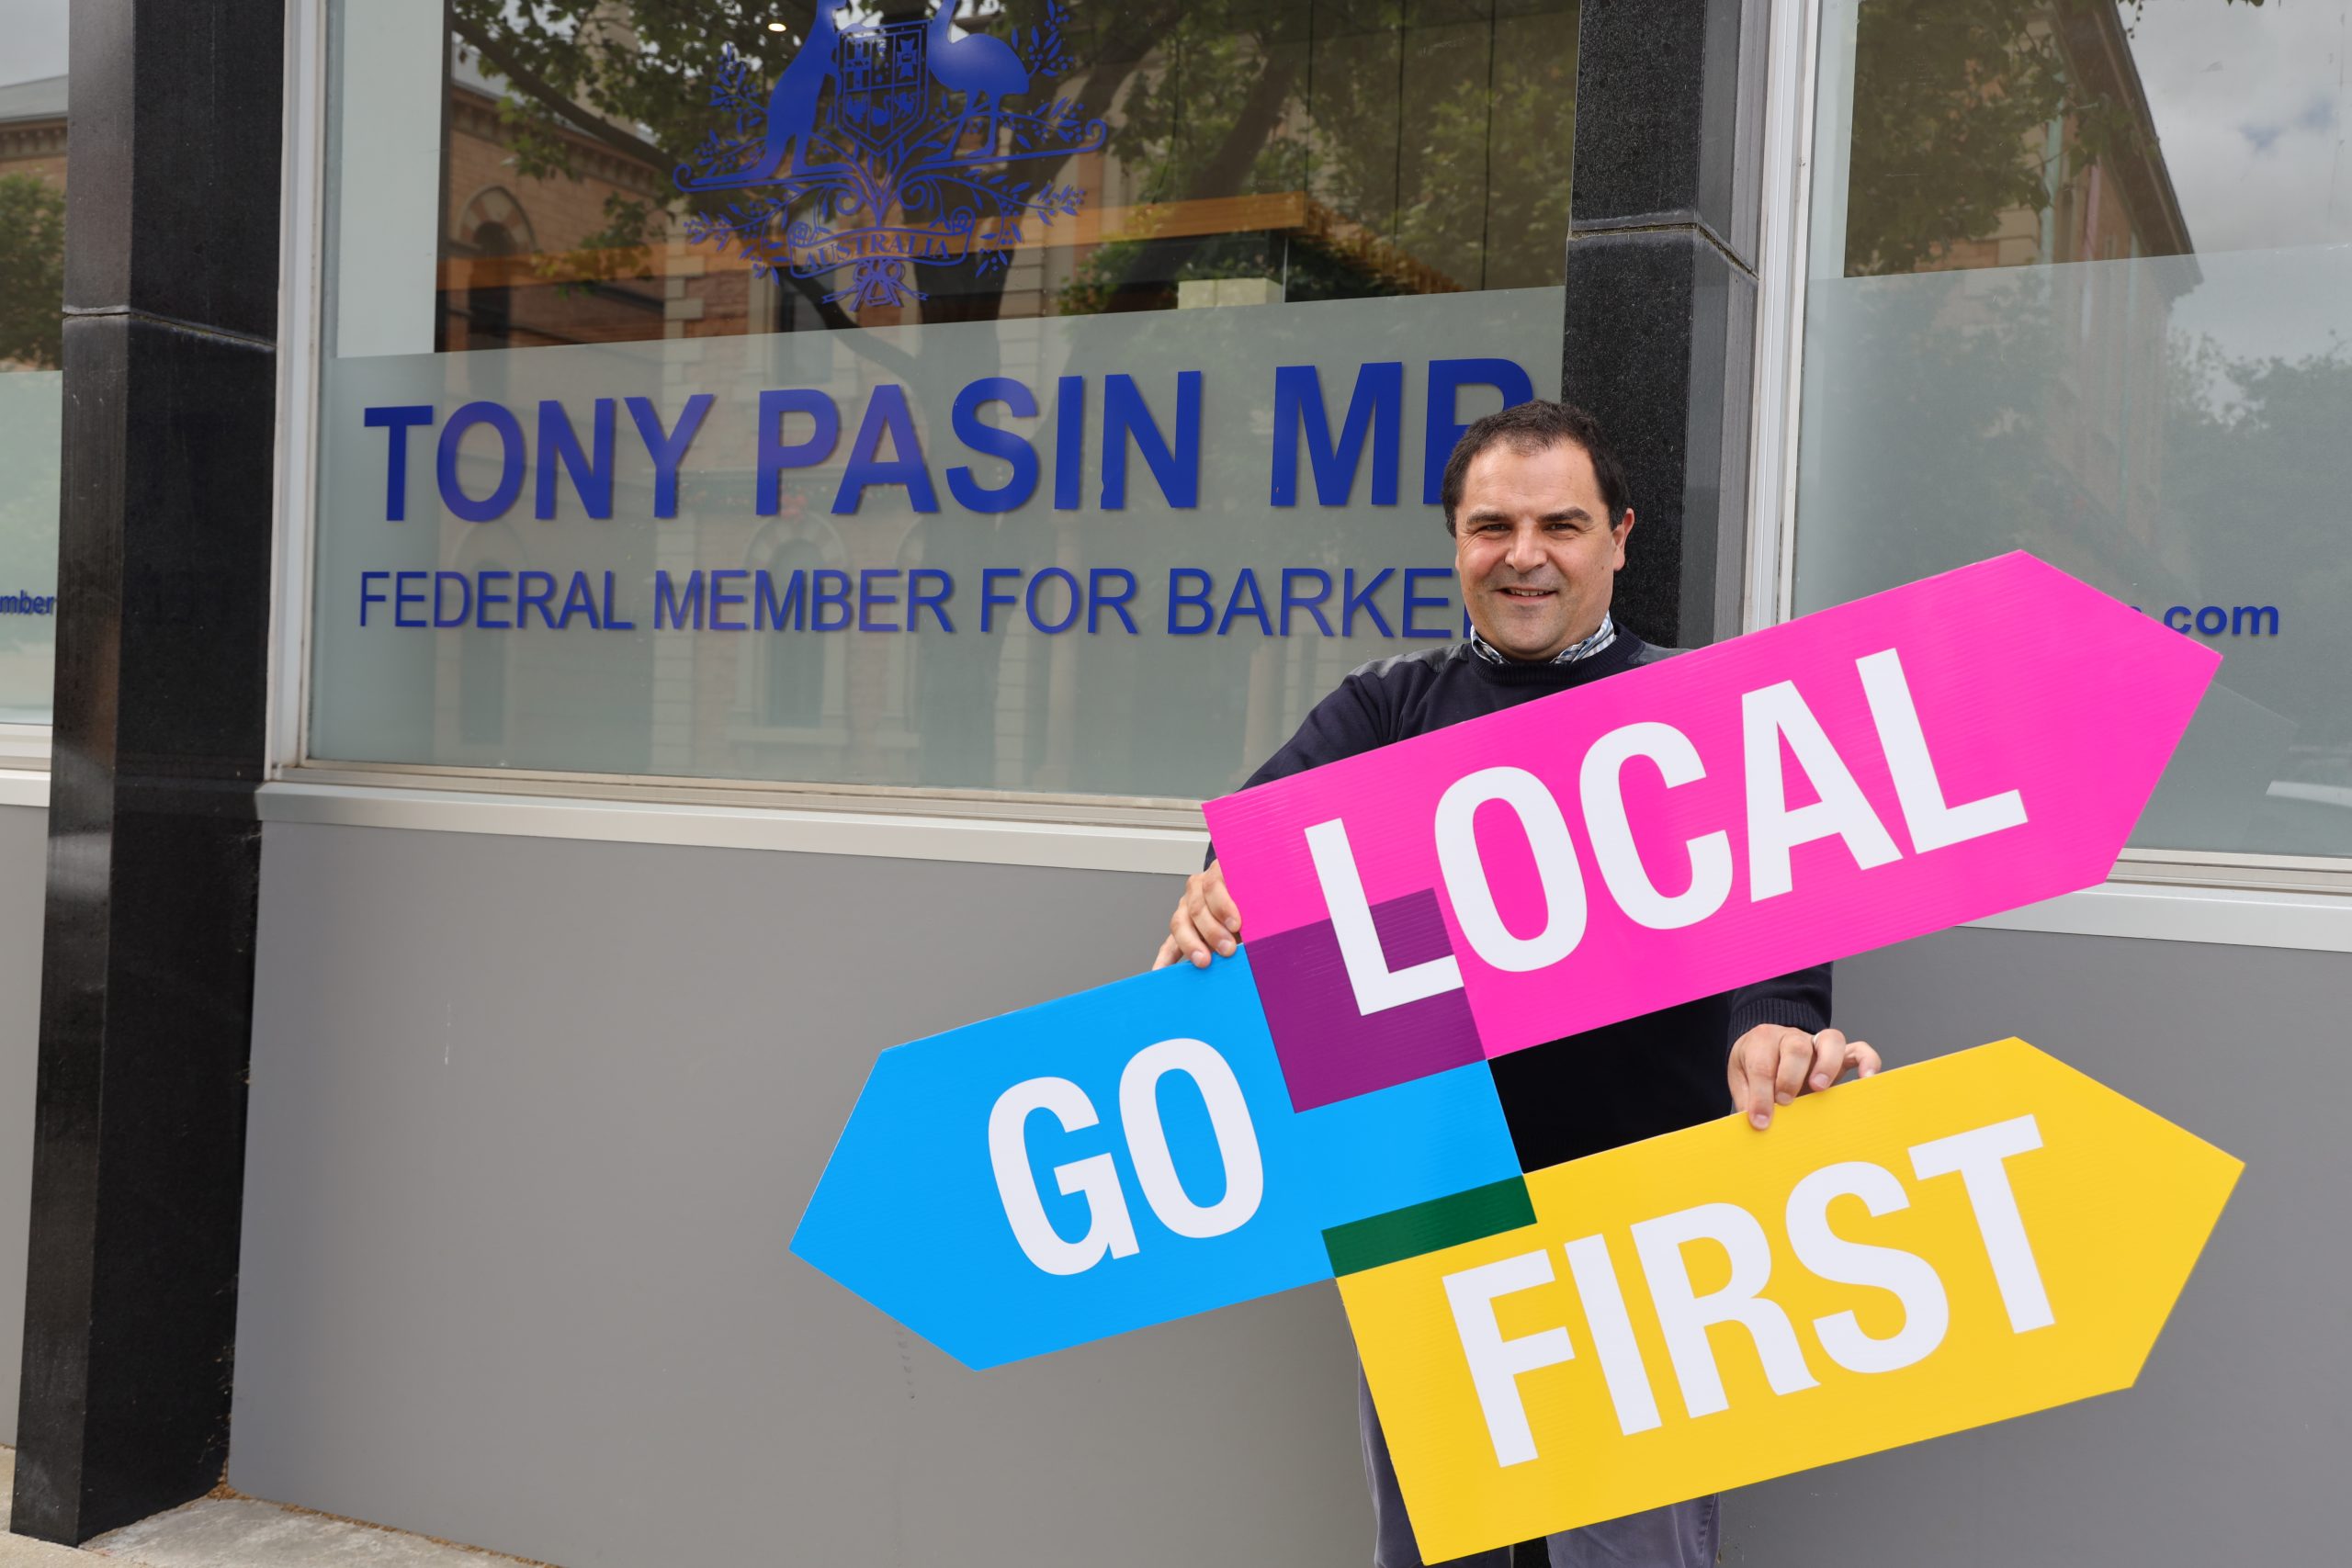 ‘GO LOCAL FIRST’ CAMPAIGN LAUNCHED TO SUPPORT SMALL BUSINESSES IN BARKER